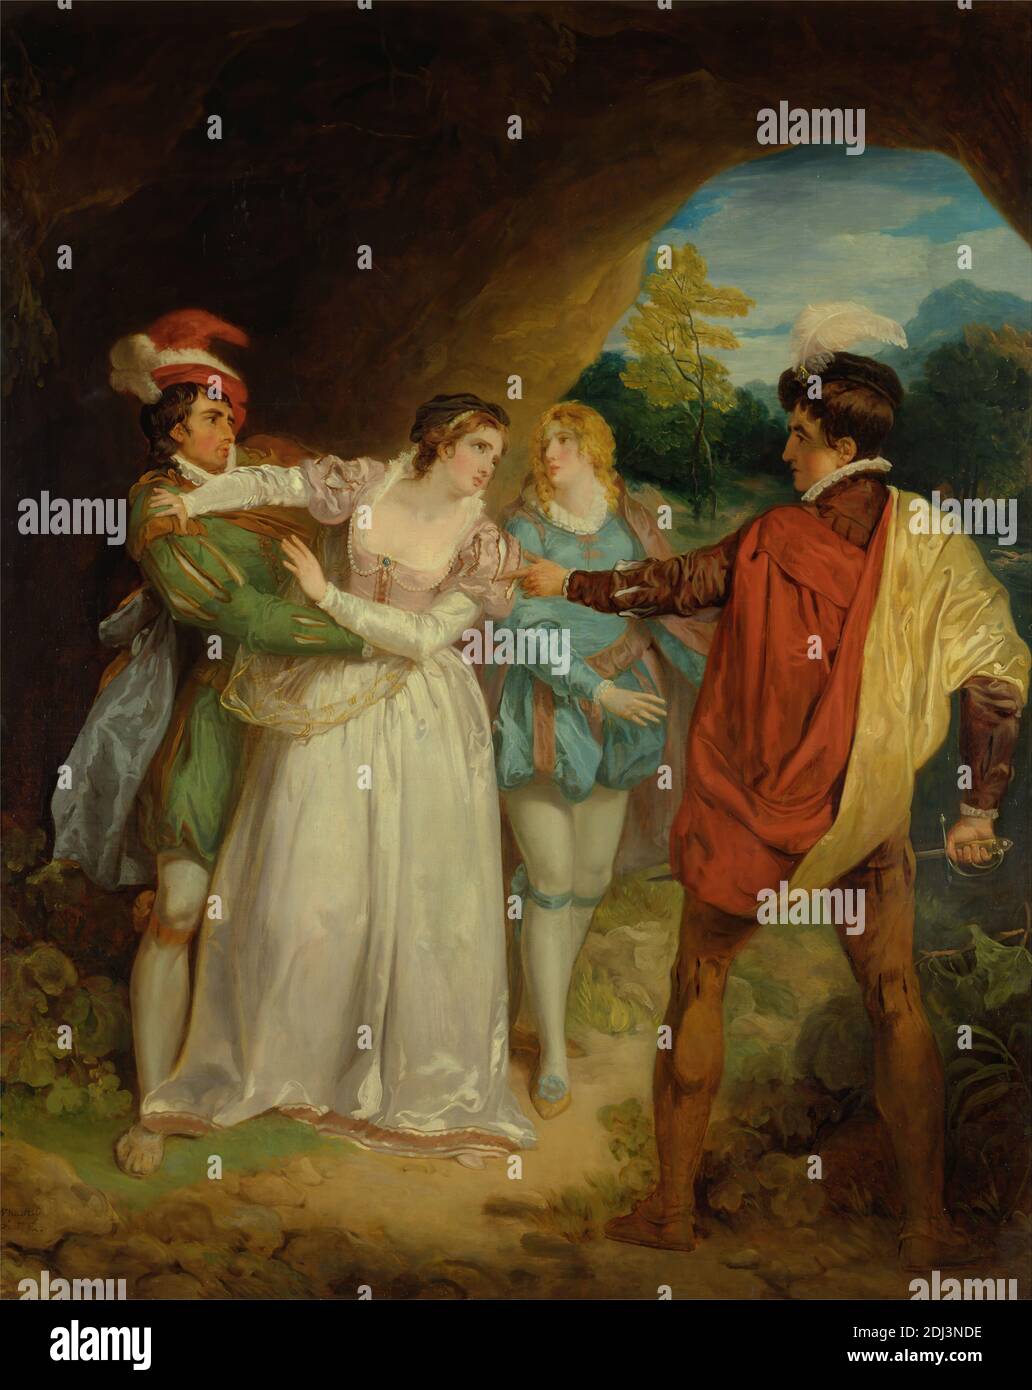 Valentine rescuing Silvia from Proteus, from Shakespeare's 'The Two Gentlemen of Verona,' Act V, Scene 4, the Outlaws' Cave, Francis Wheatley, 1747–1801, British, 1792, Oil on canvas, Support (PTG): 65 1/2 x 52 1/2 inches (166.4 x 133.4 cm), cave, comedy, costume, disguise, gesture, literary theme, love, lovers, men, mountain, The Two Gentlemen of Verona, play by William Shakespeare, theater (discipline), women Stock Photo